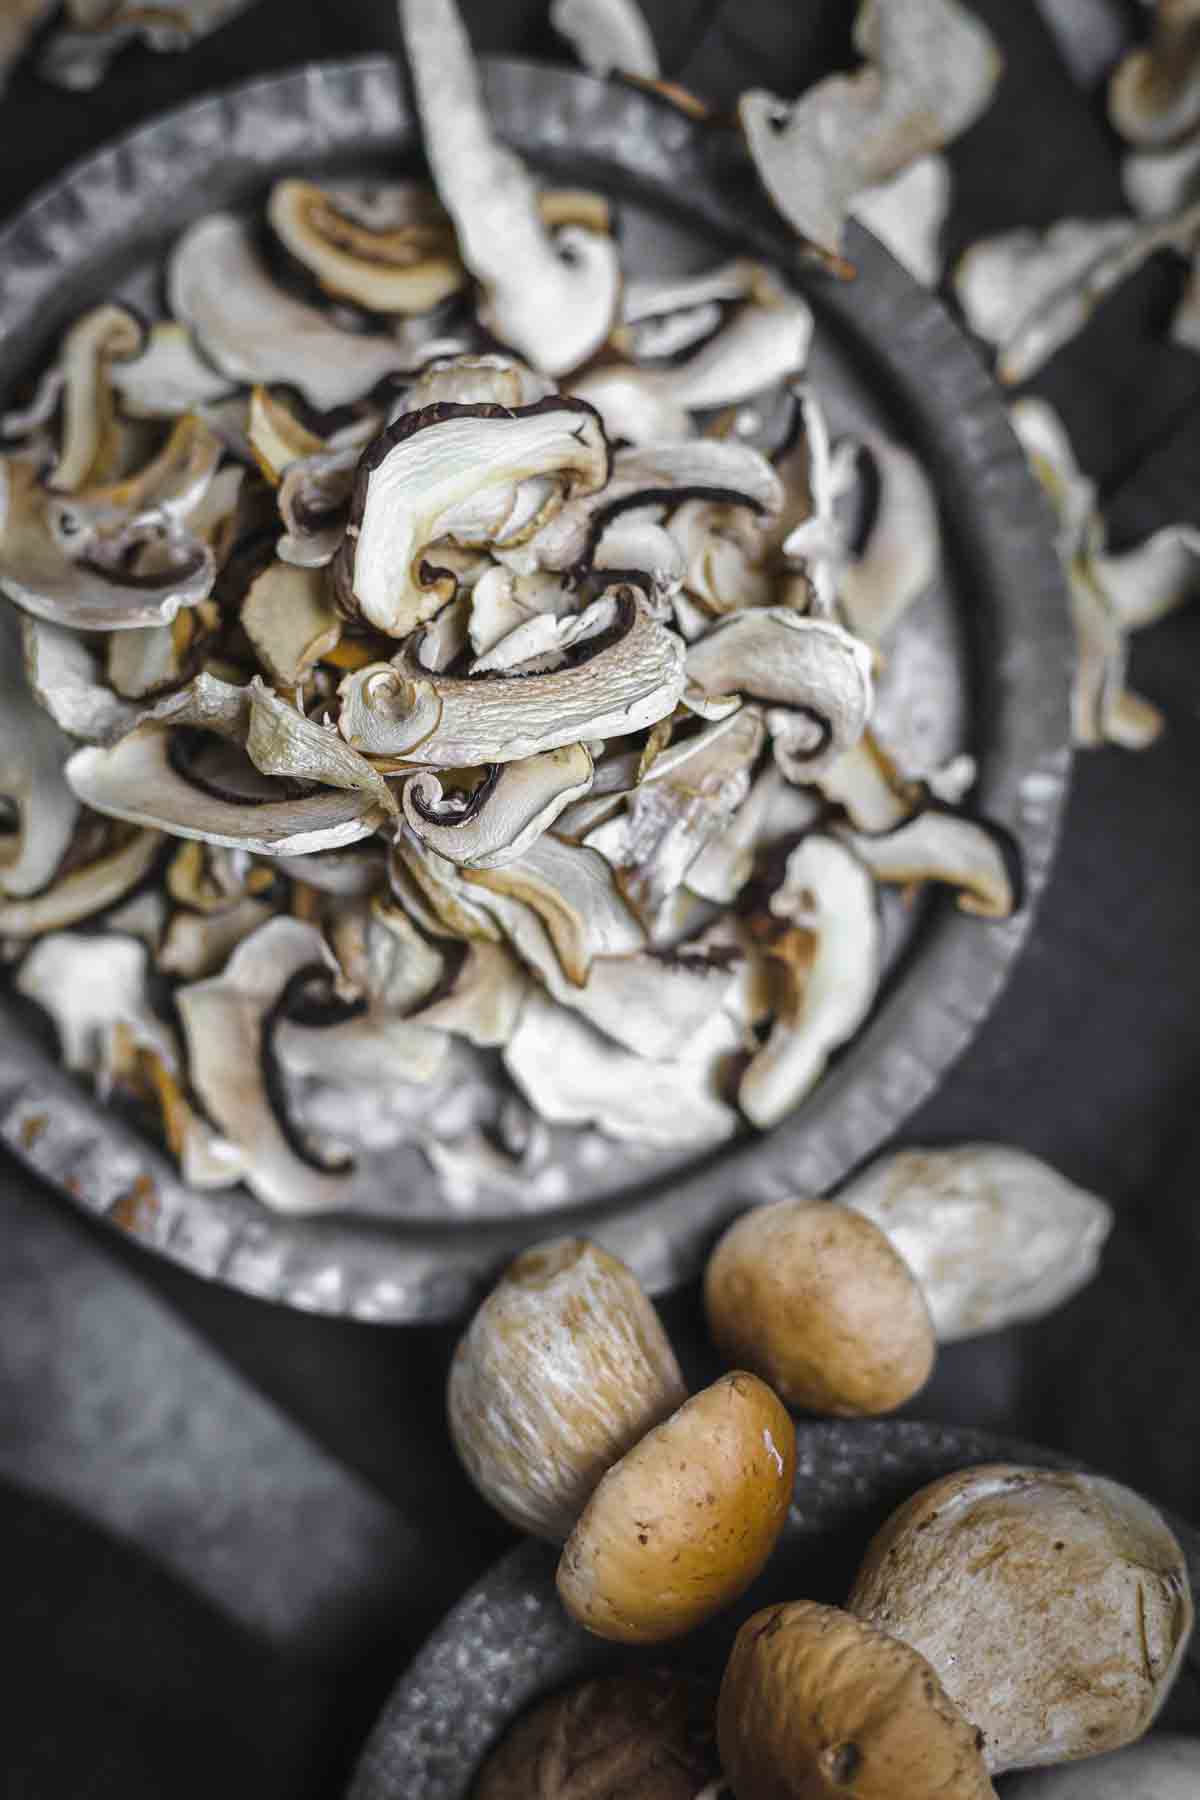 Dried slices of mushrooms in a gray tray.